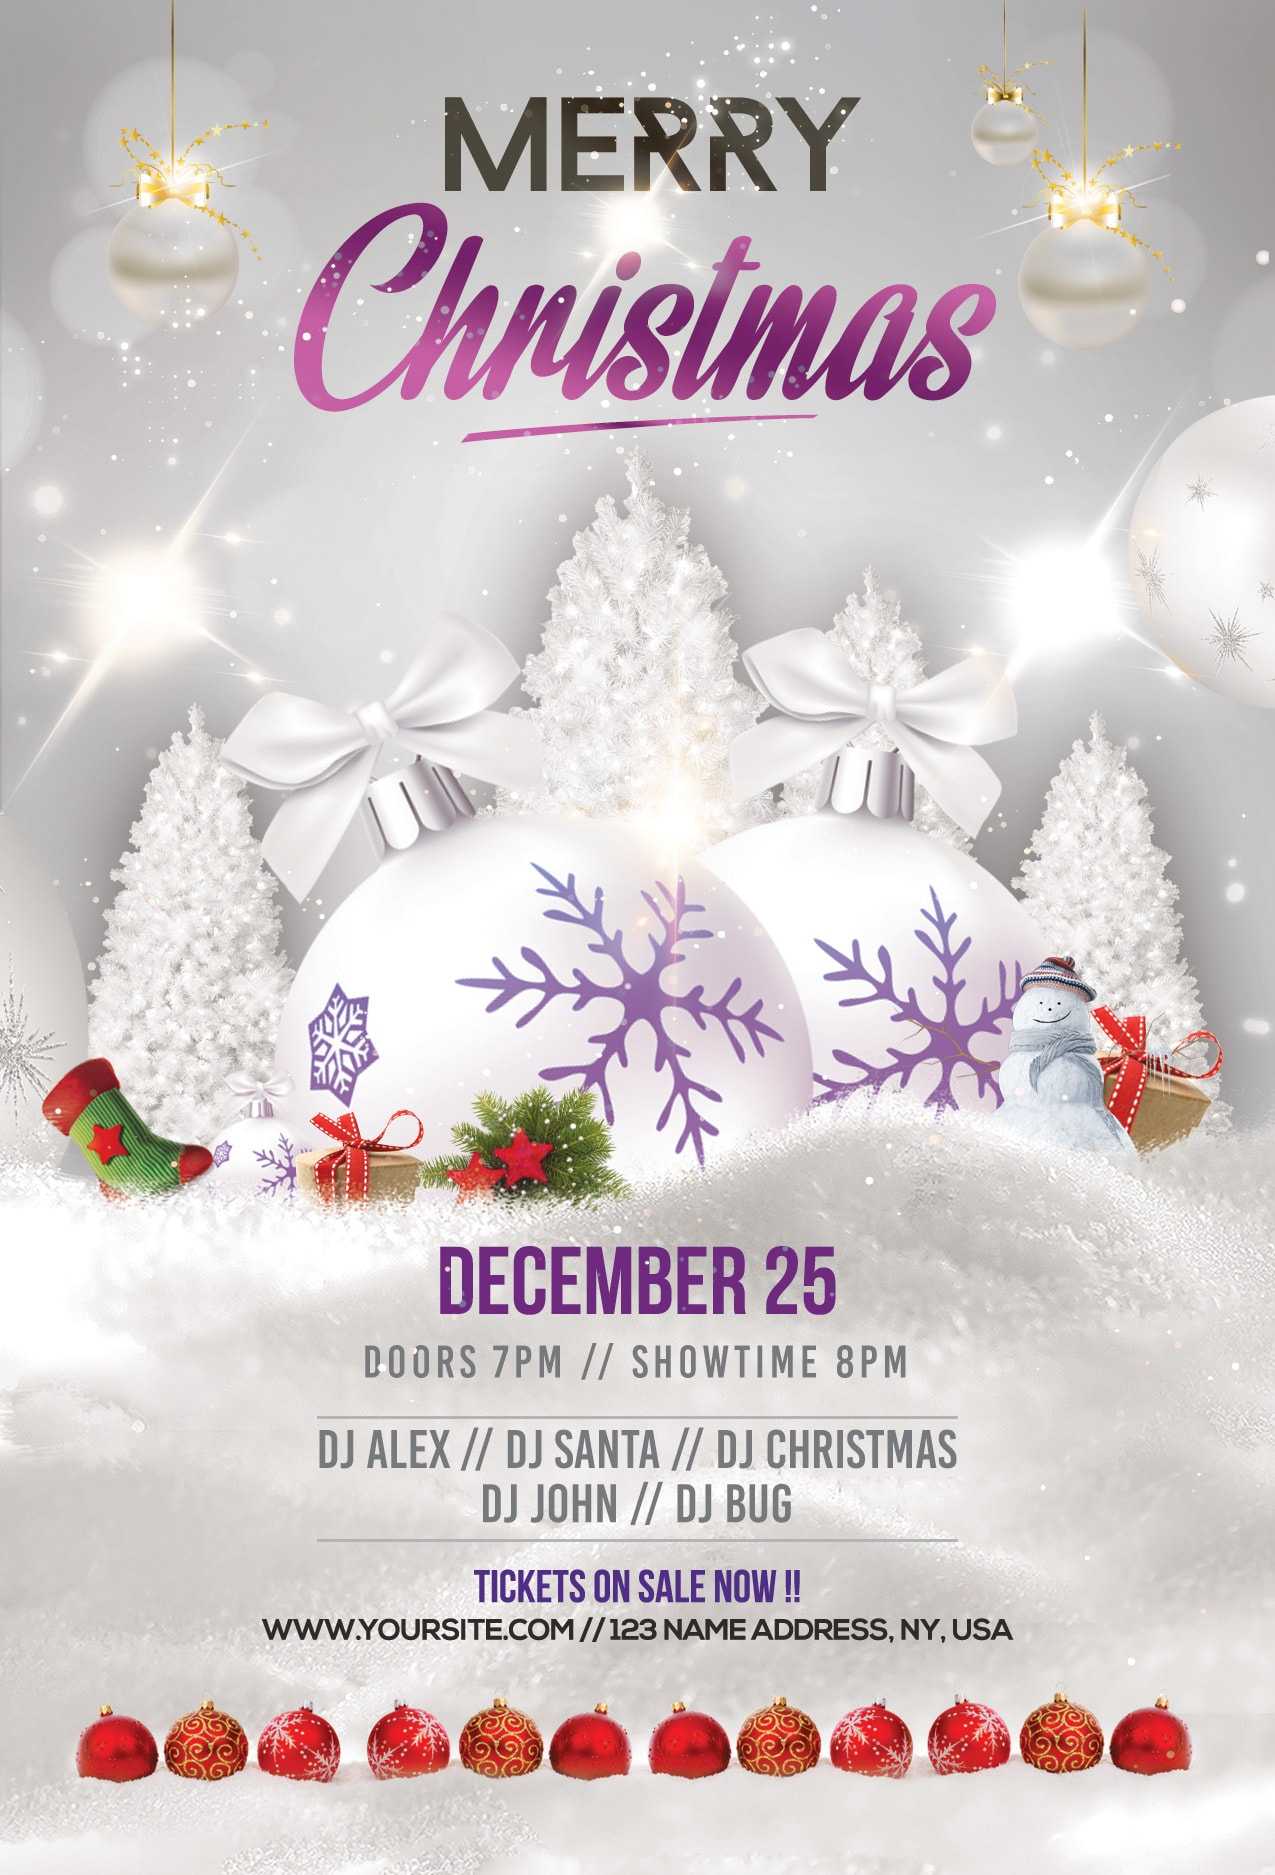 Merry Christmas & Holiday Free Psd Flyer Template – Free Psd Inside Christmas Brochure Templates Free